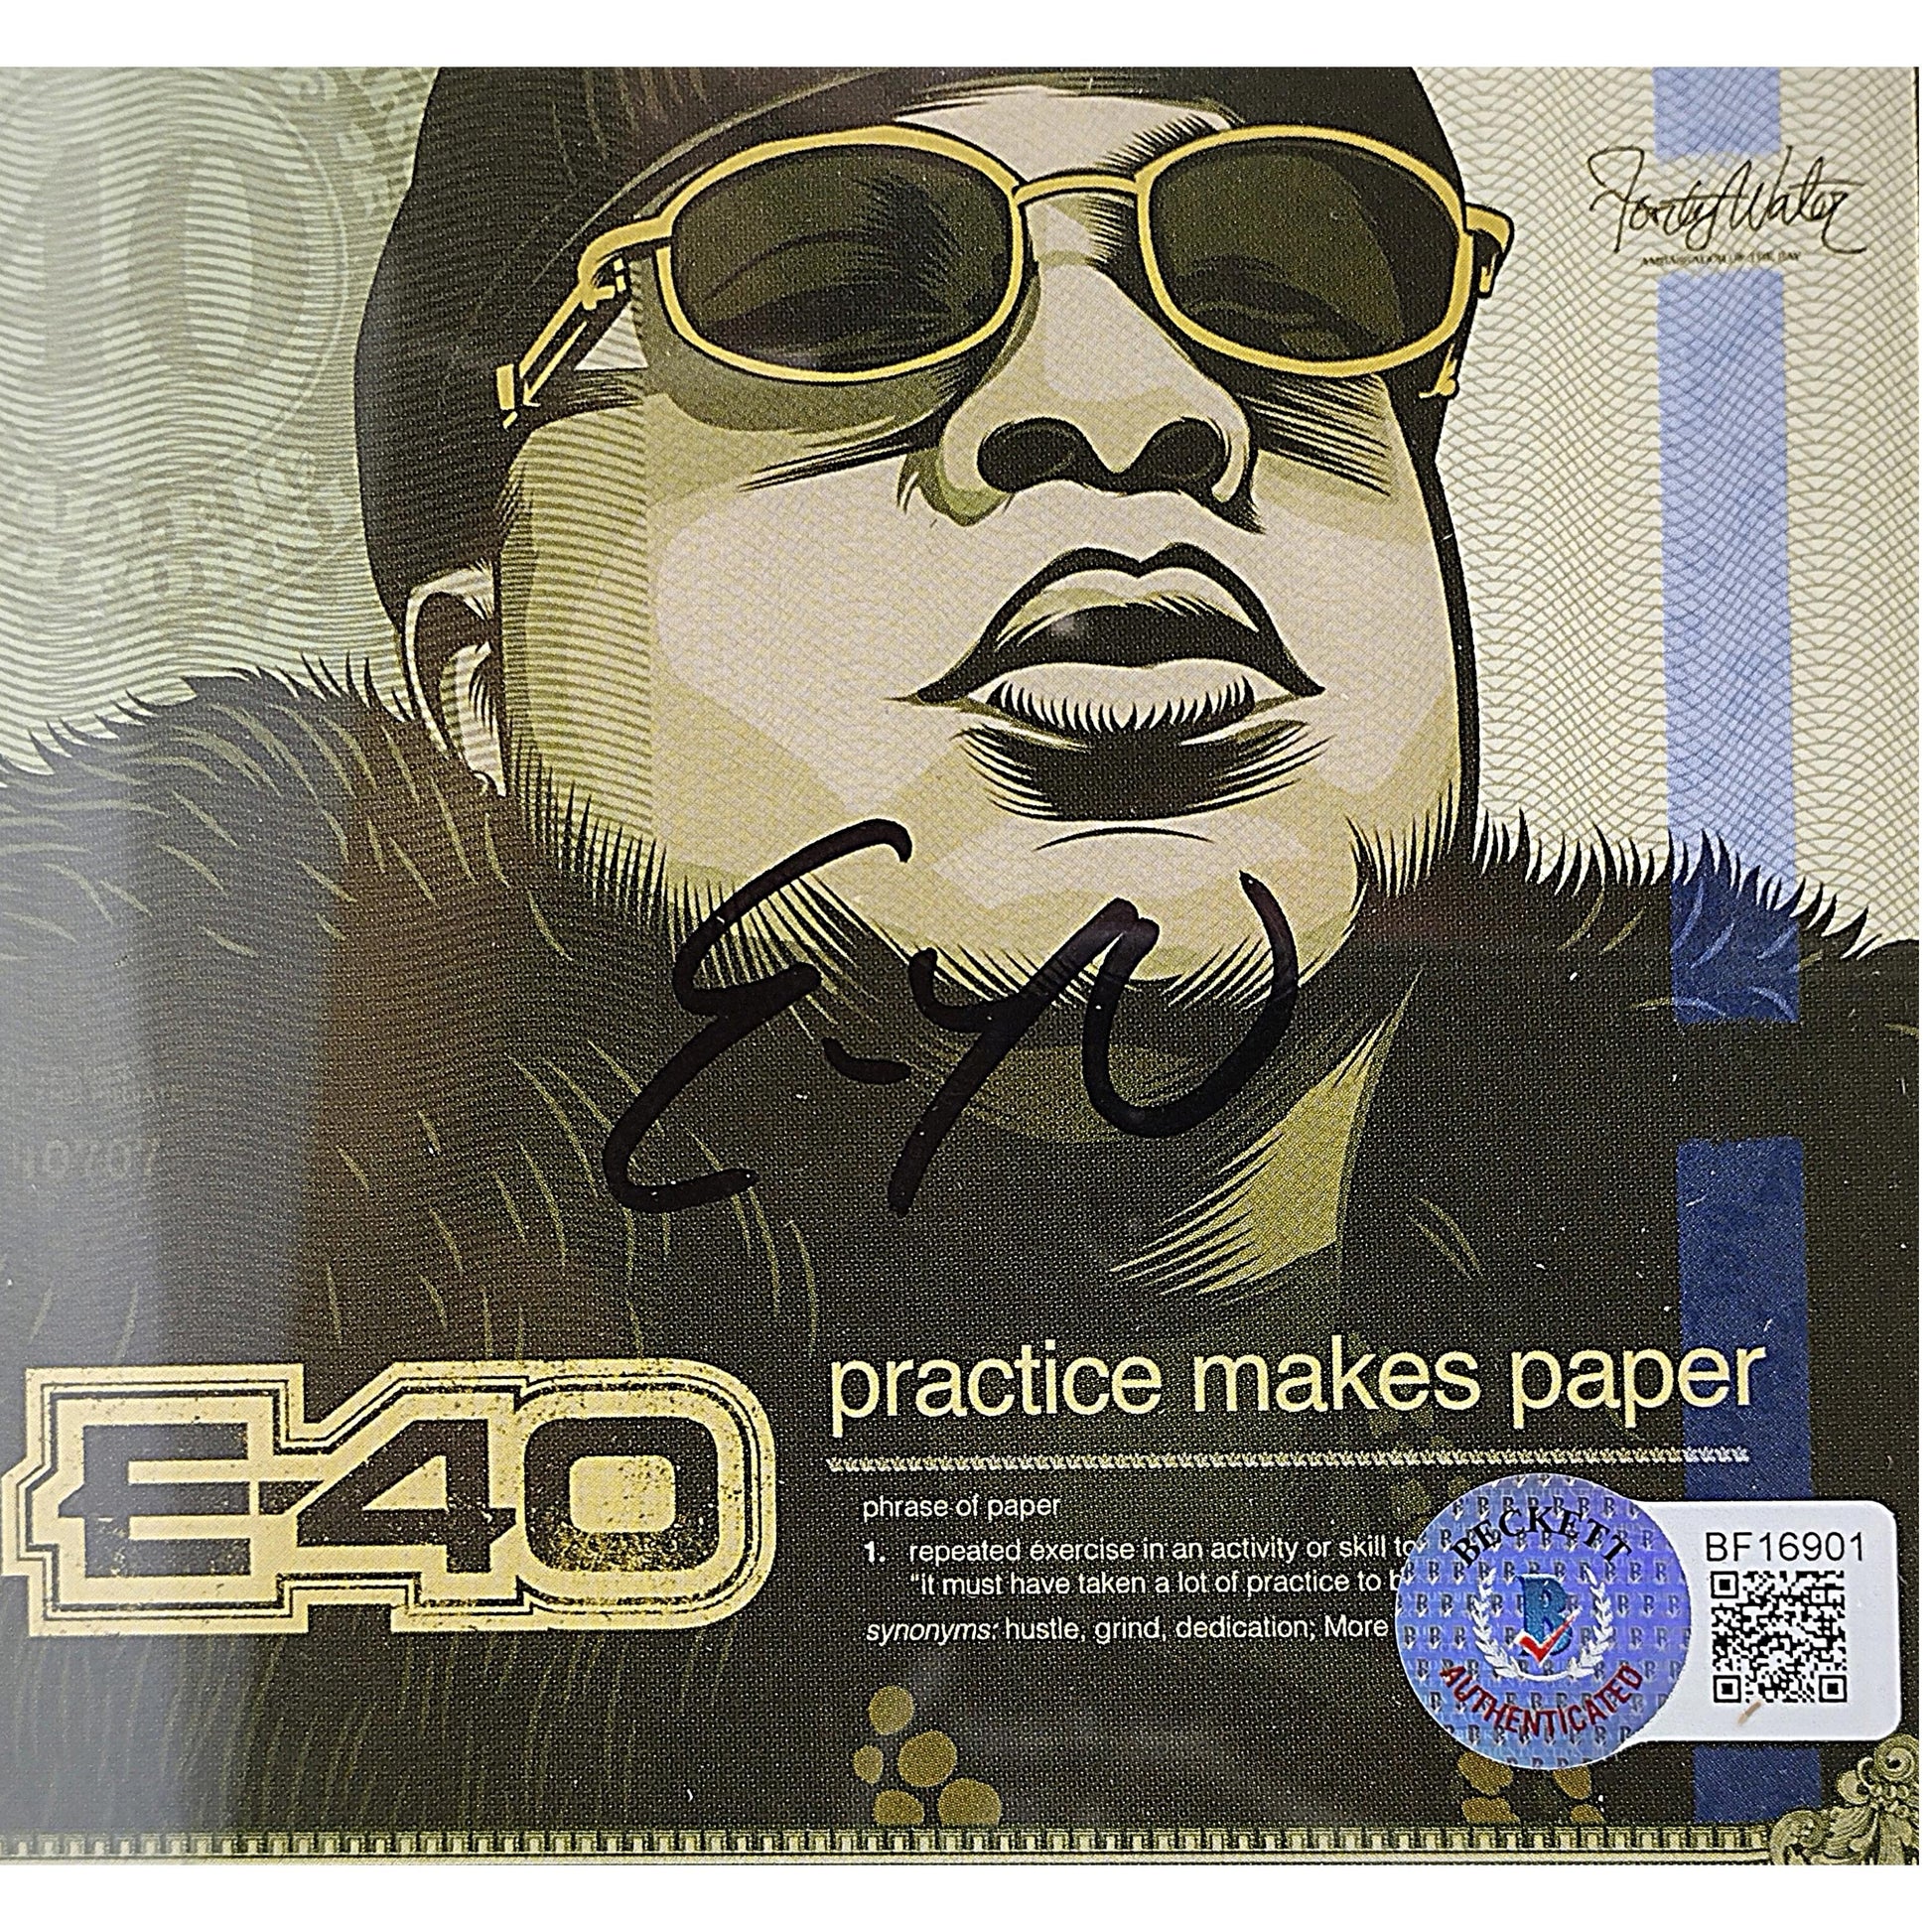 Music- Autographed- E40 Signed Practice Makes Paper Framed Compact Disc Cover Booklet Display- Beckett Authentication 302